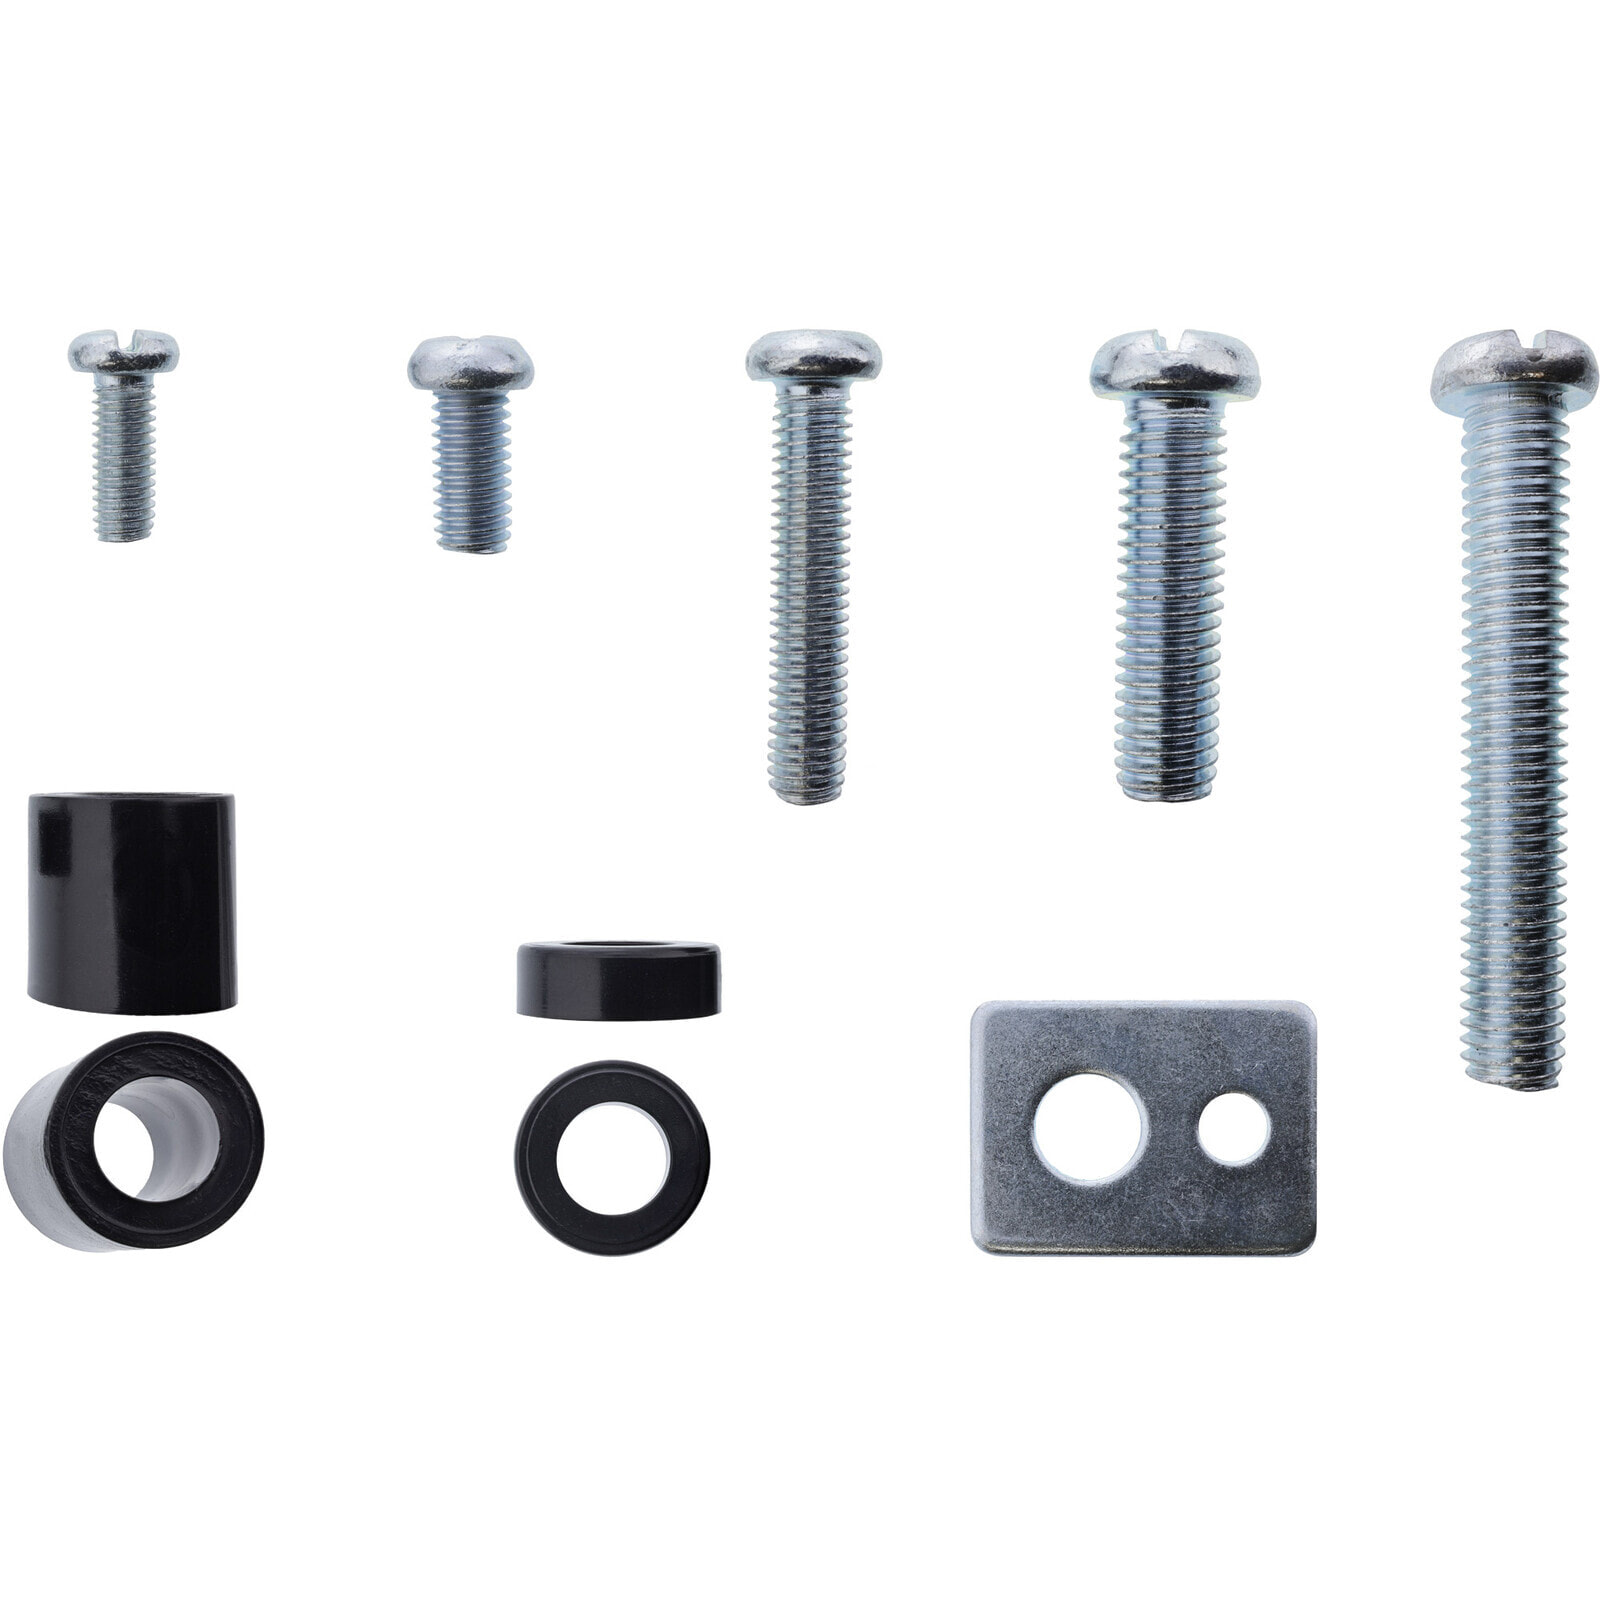 Screw set 40 pieces for TV wall mount